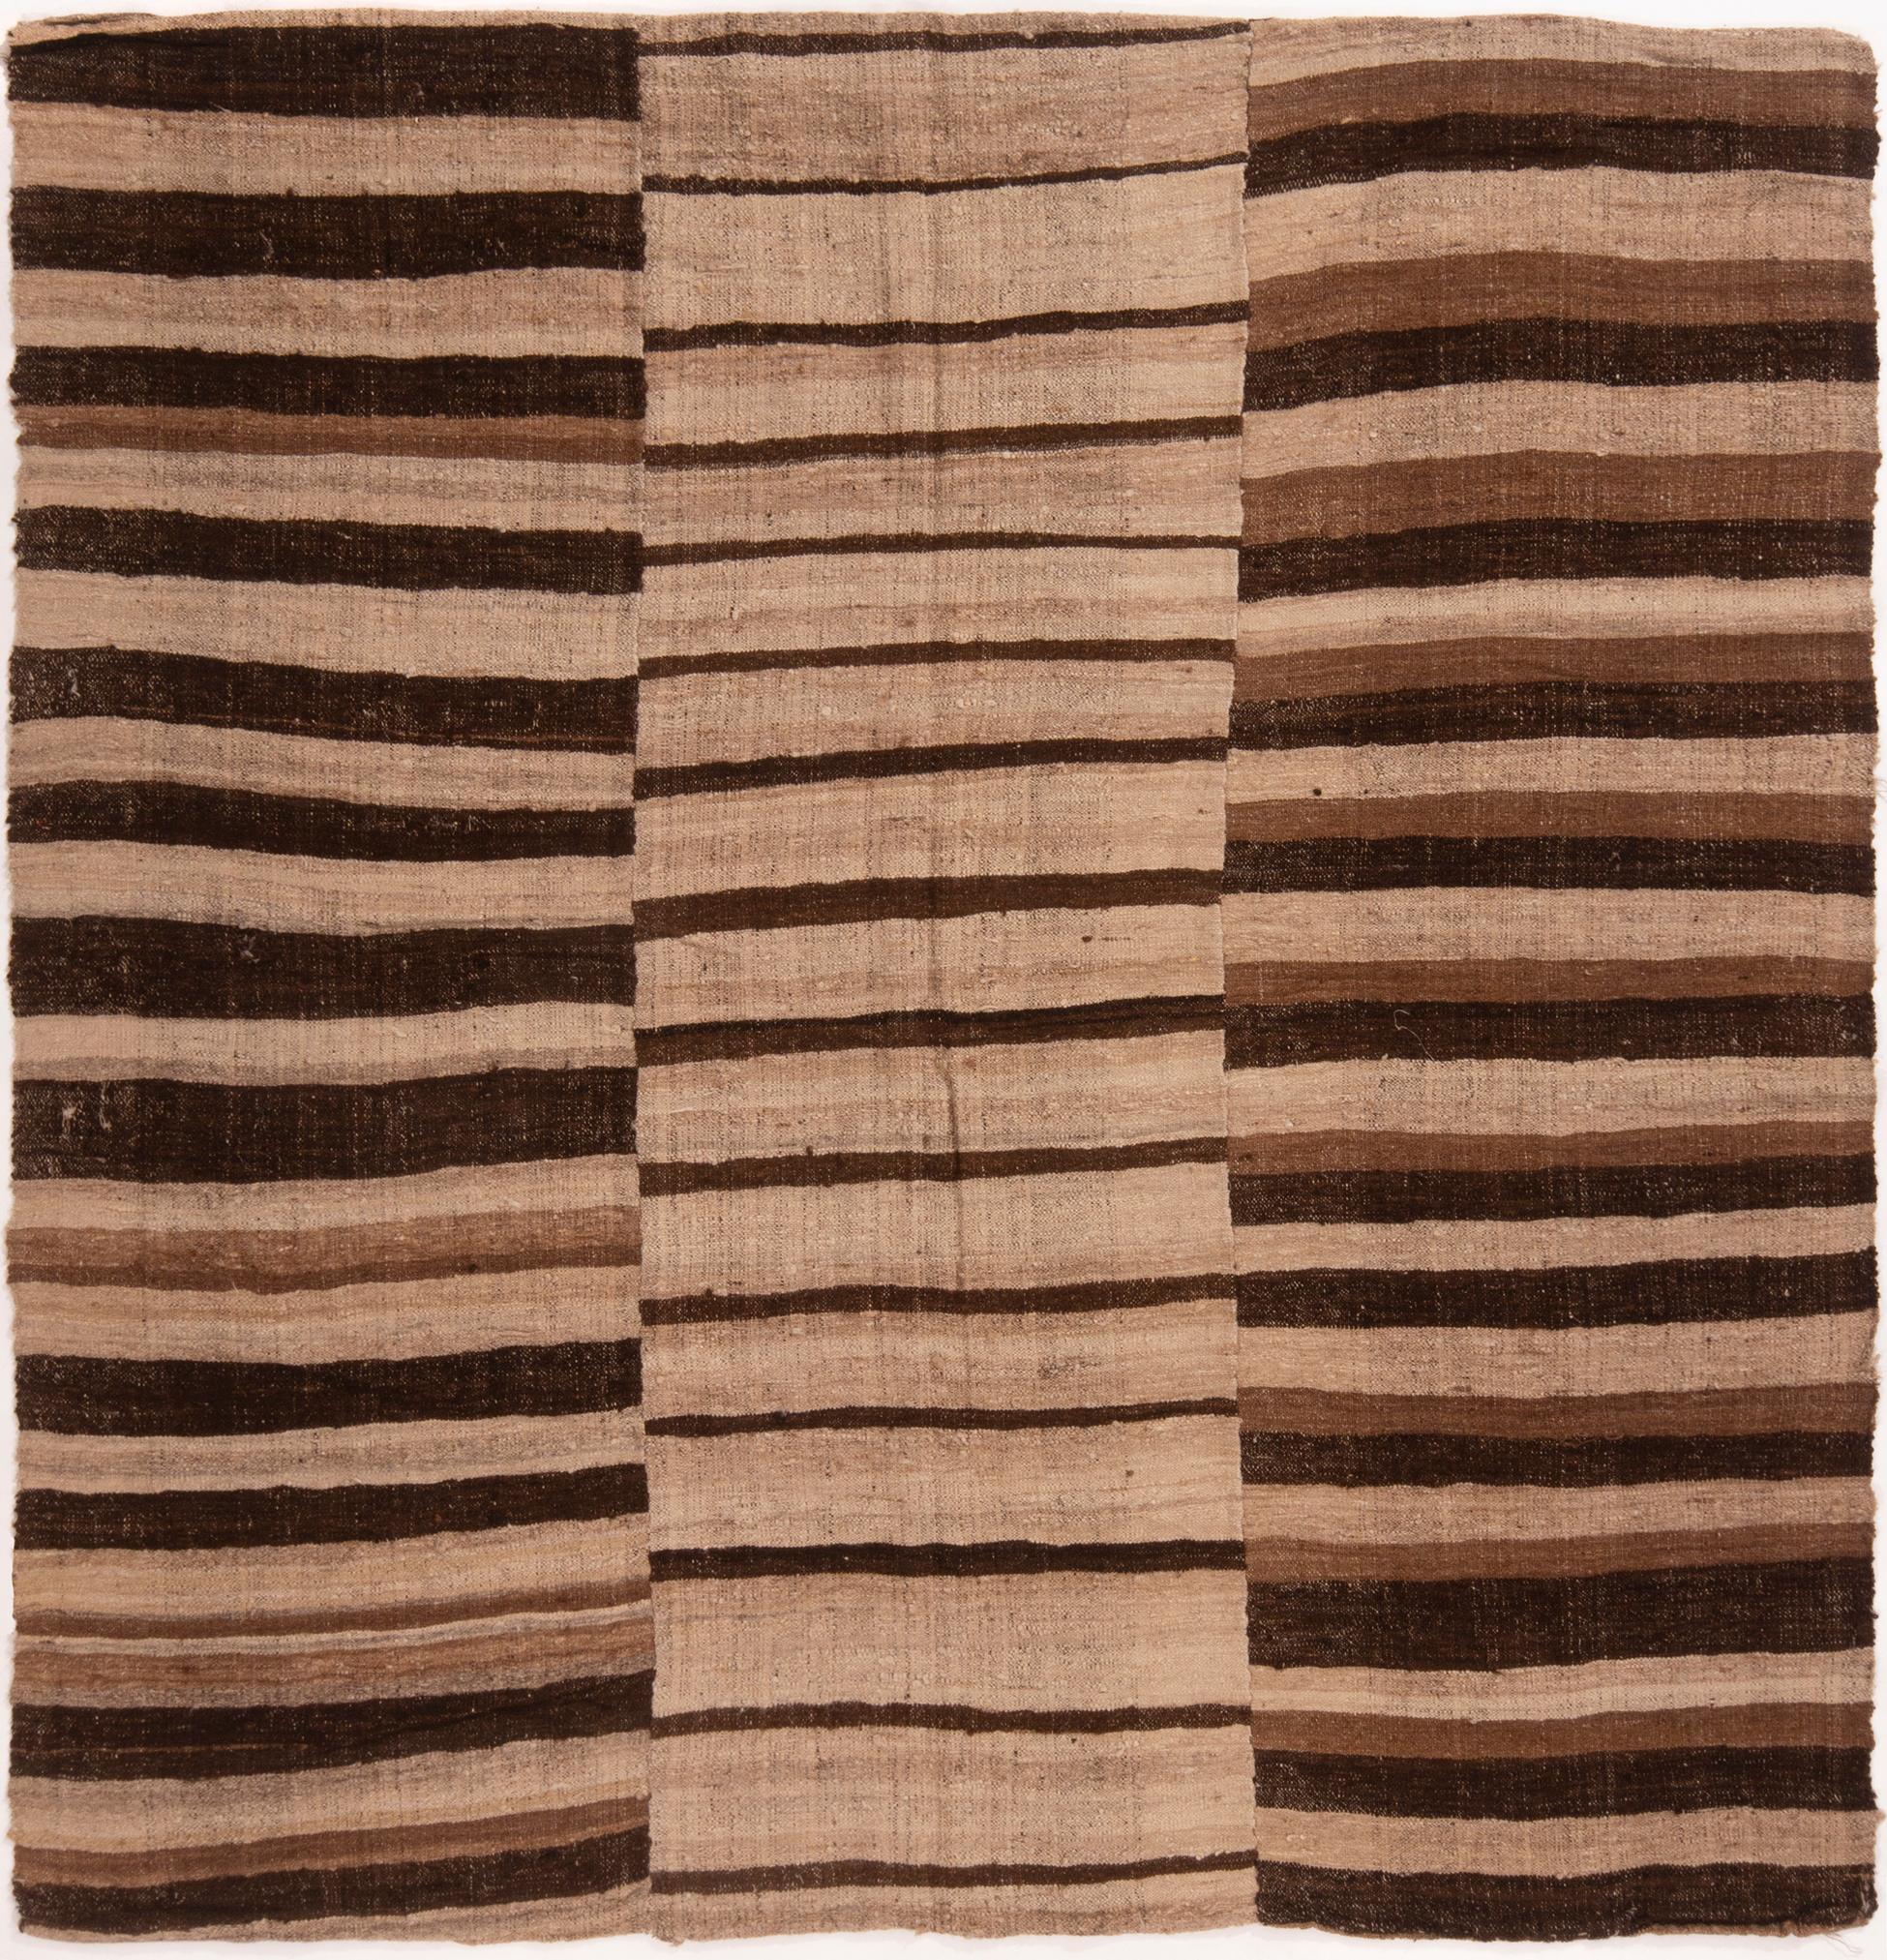 Originating from Persia in 1910, this antique wool Kilim rug is a unique ancestor to a family of rugs woven in vertical panels, each of the three with their own variation of a bold-yet-Minimalist geometric design. flat-woven in high quality wool